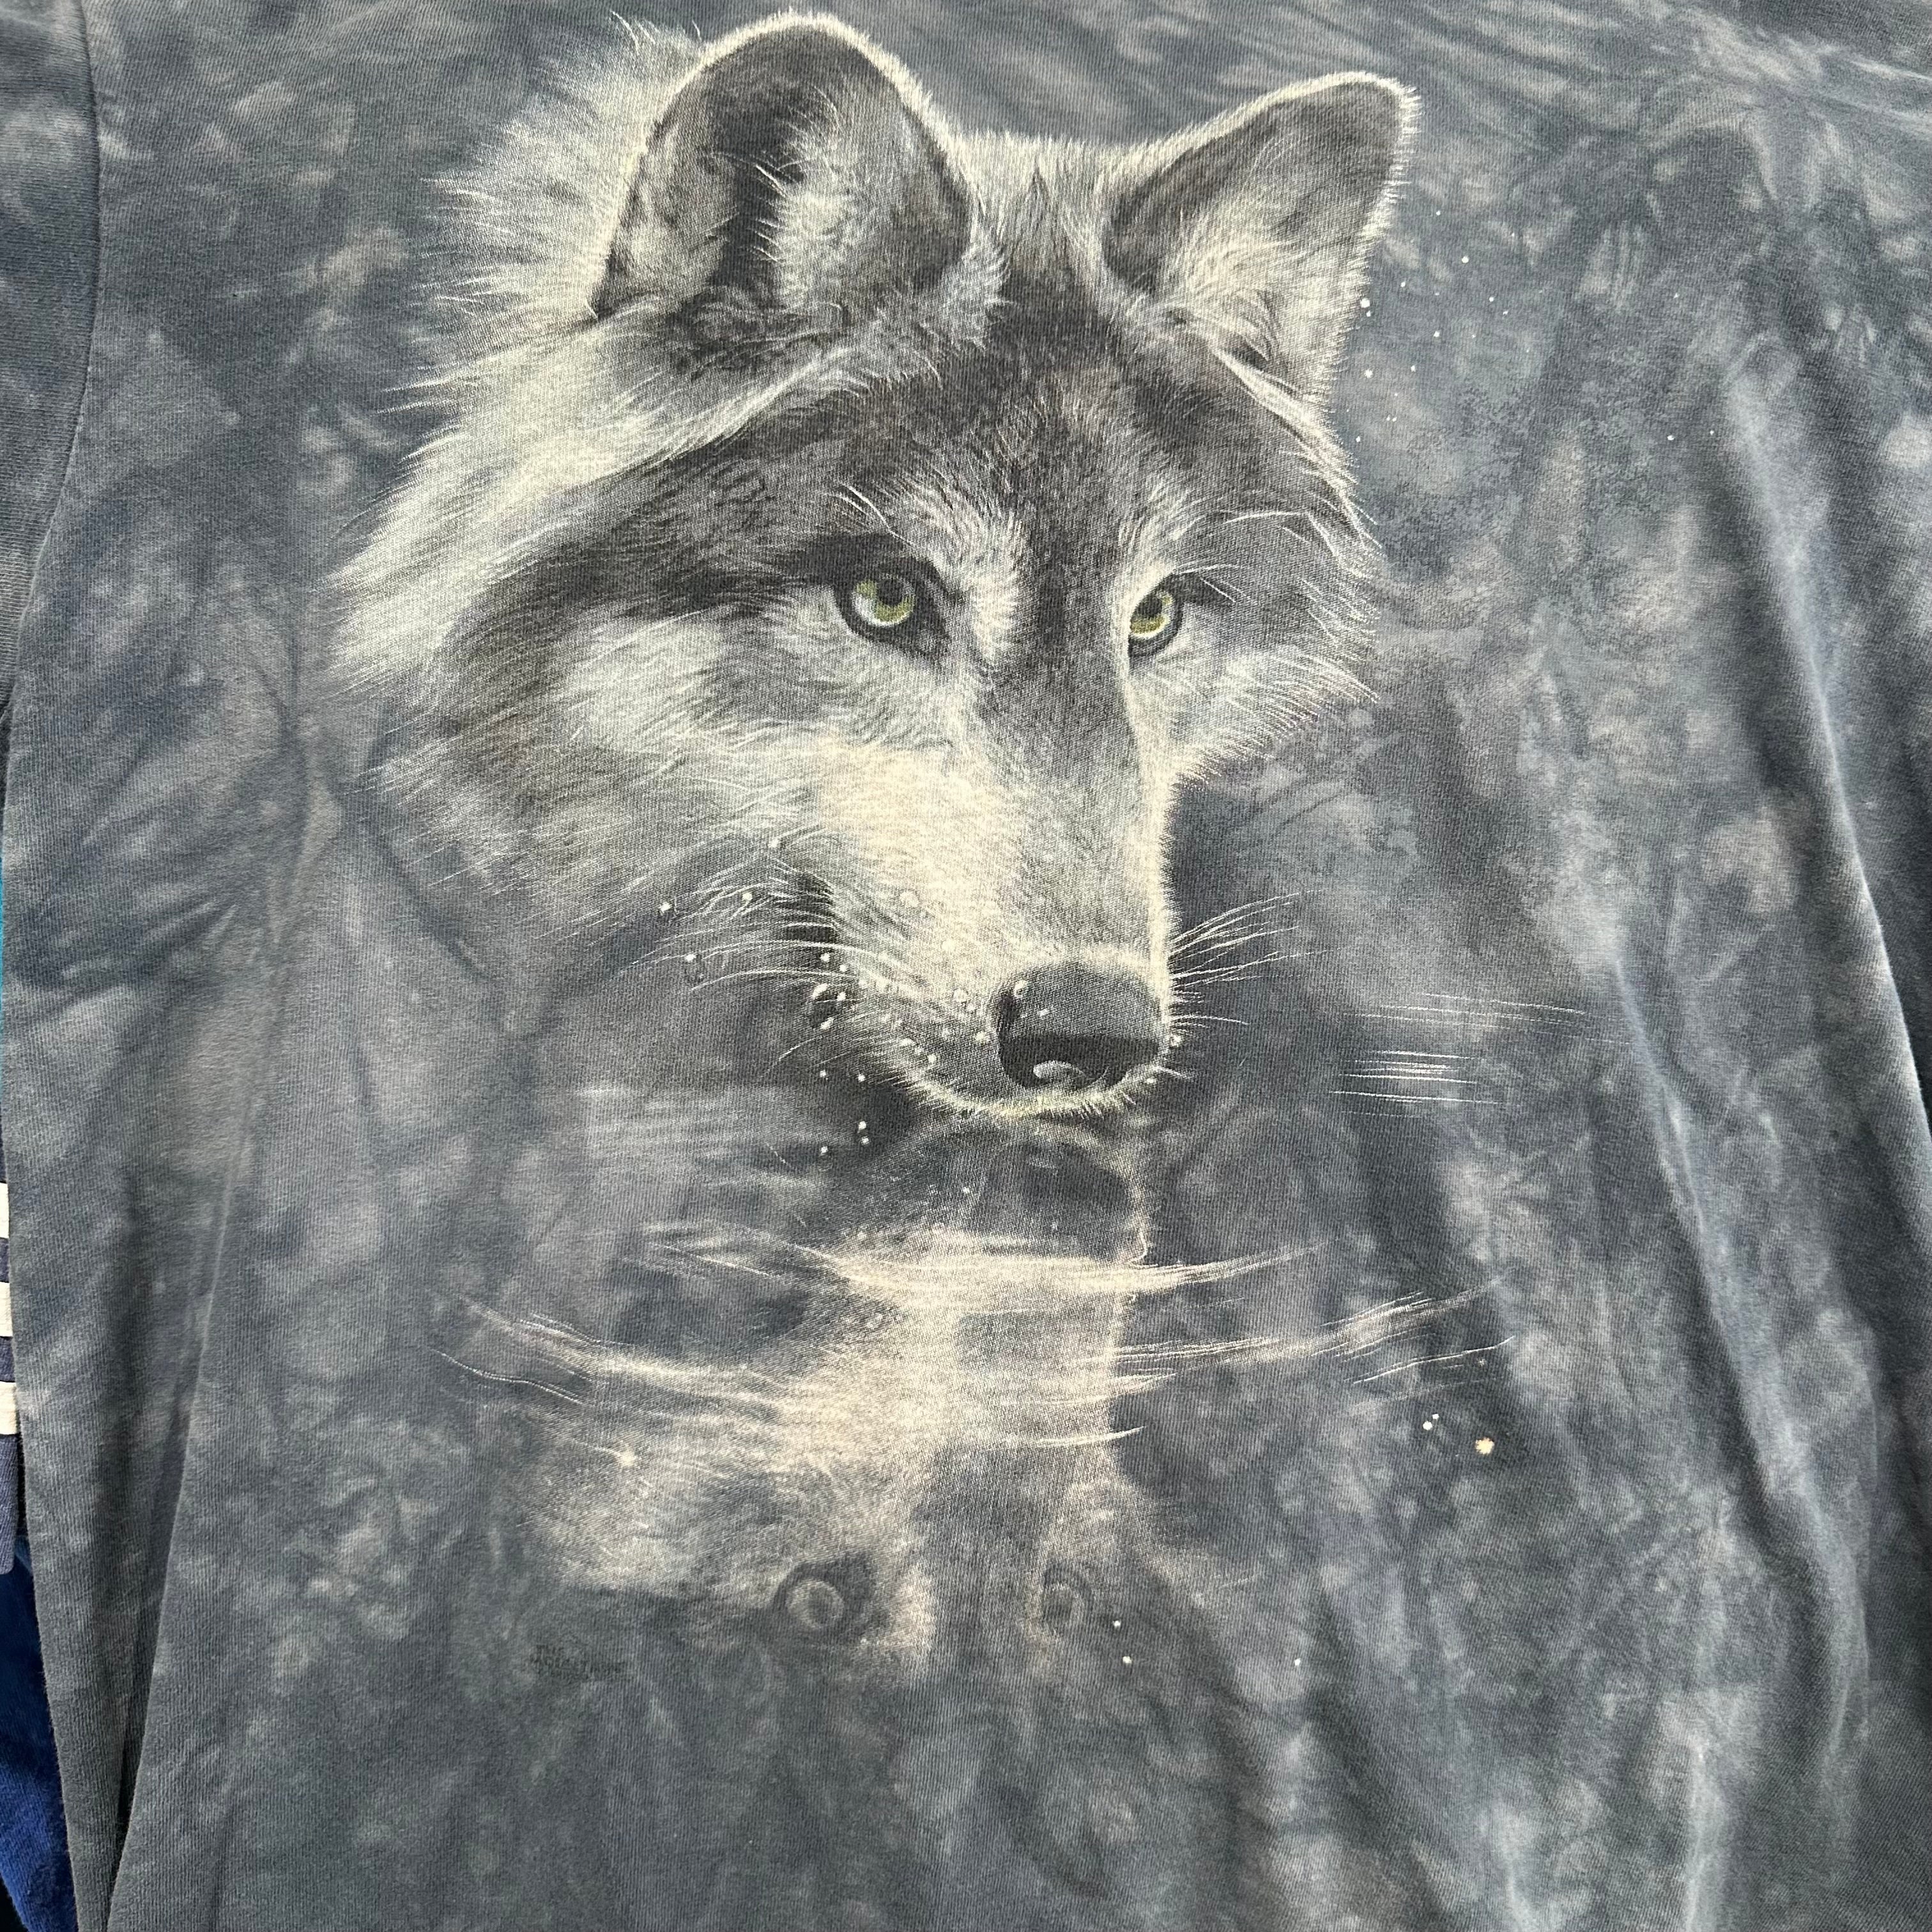 The Mountain Wolf Reflection T-Shirt